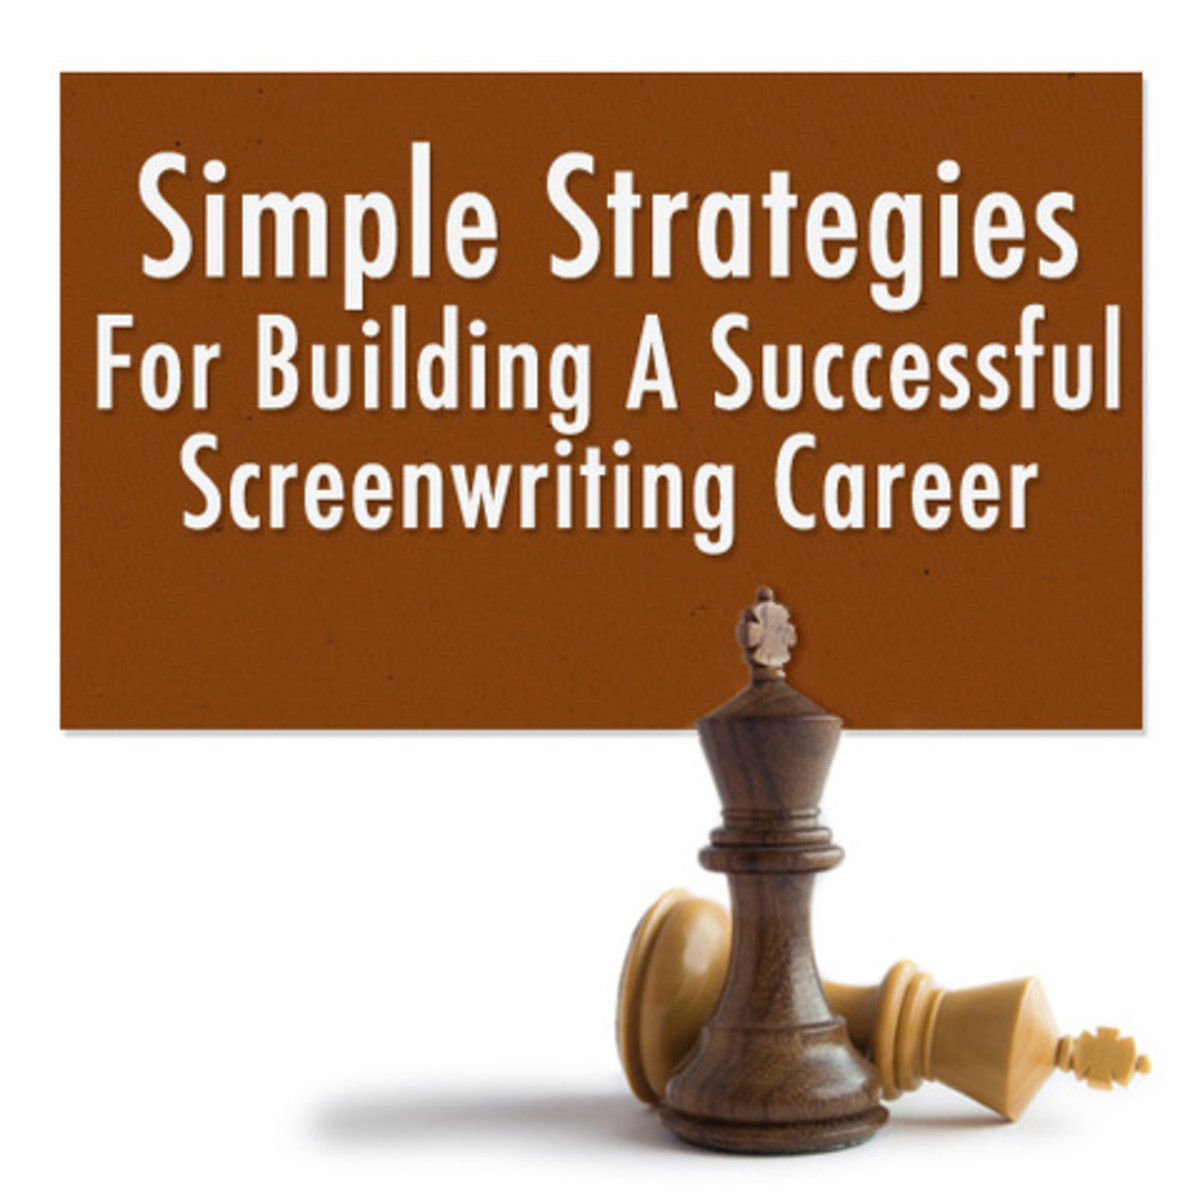 Simple Strategies for Building a Successful Screenwriting Career